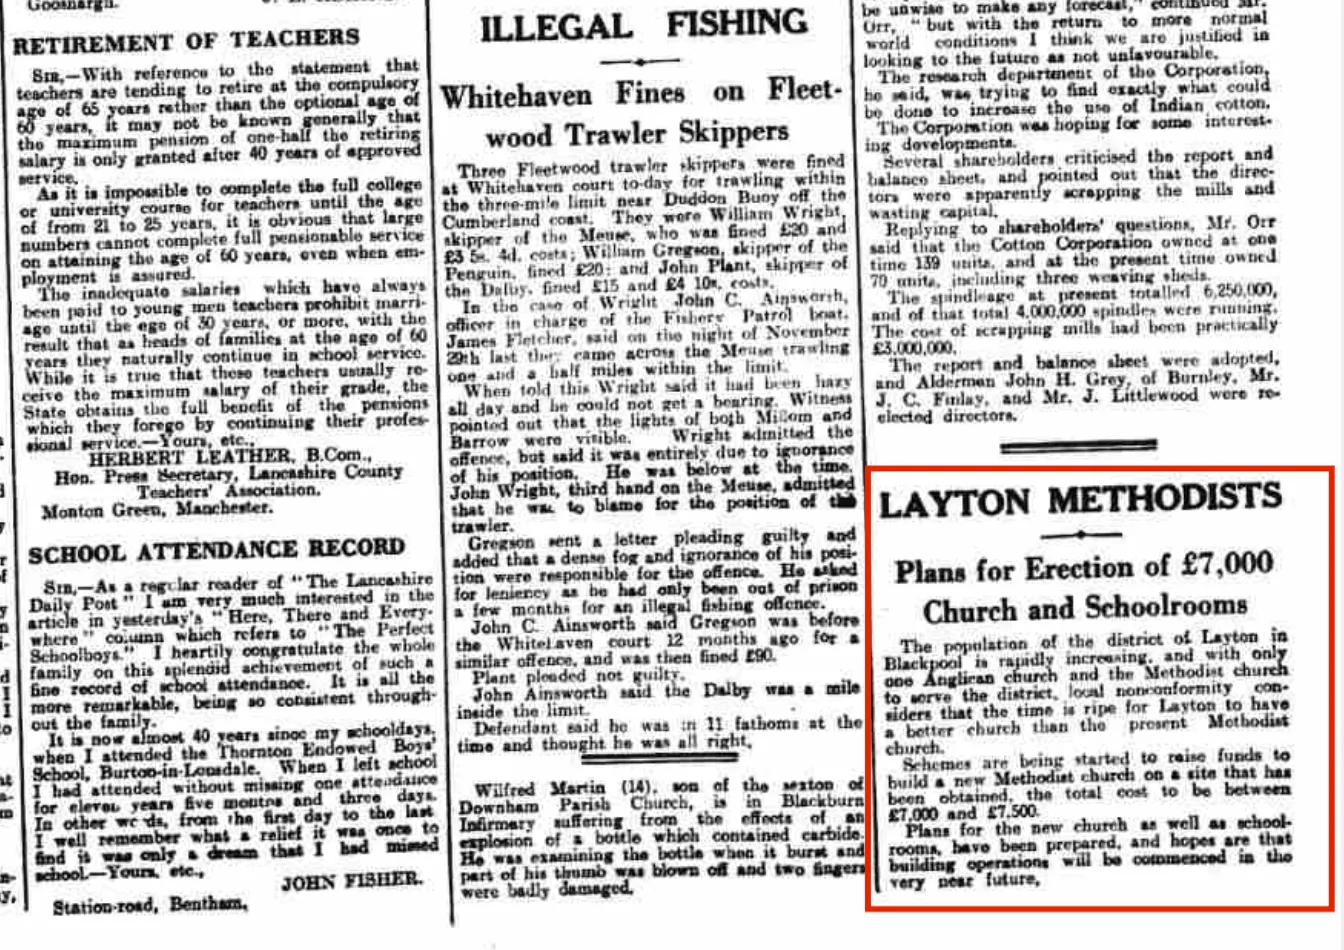 1934 newspaper cutting about plans for a new Layton Methodist Church